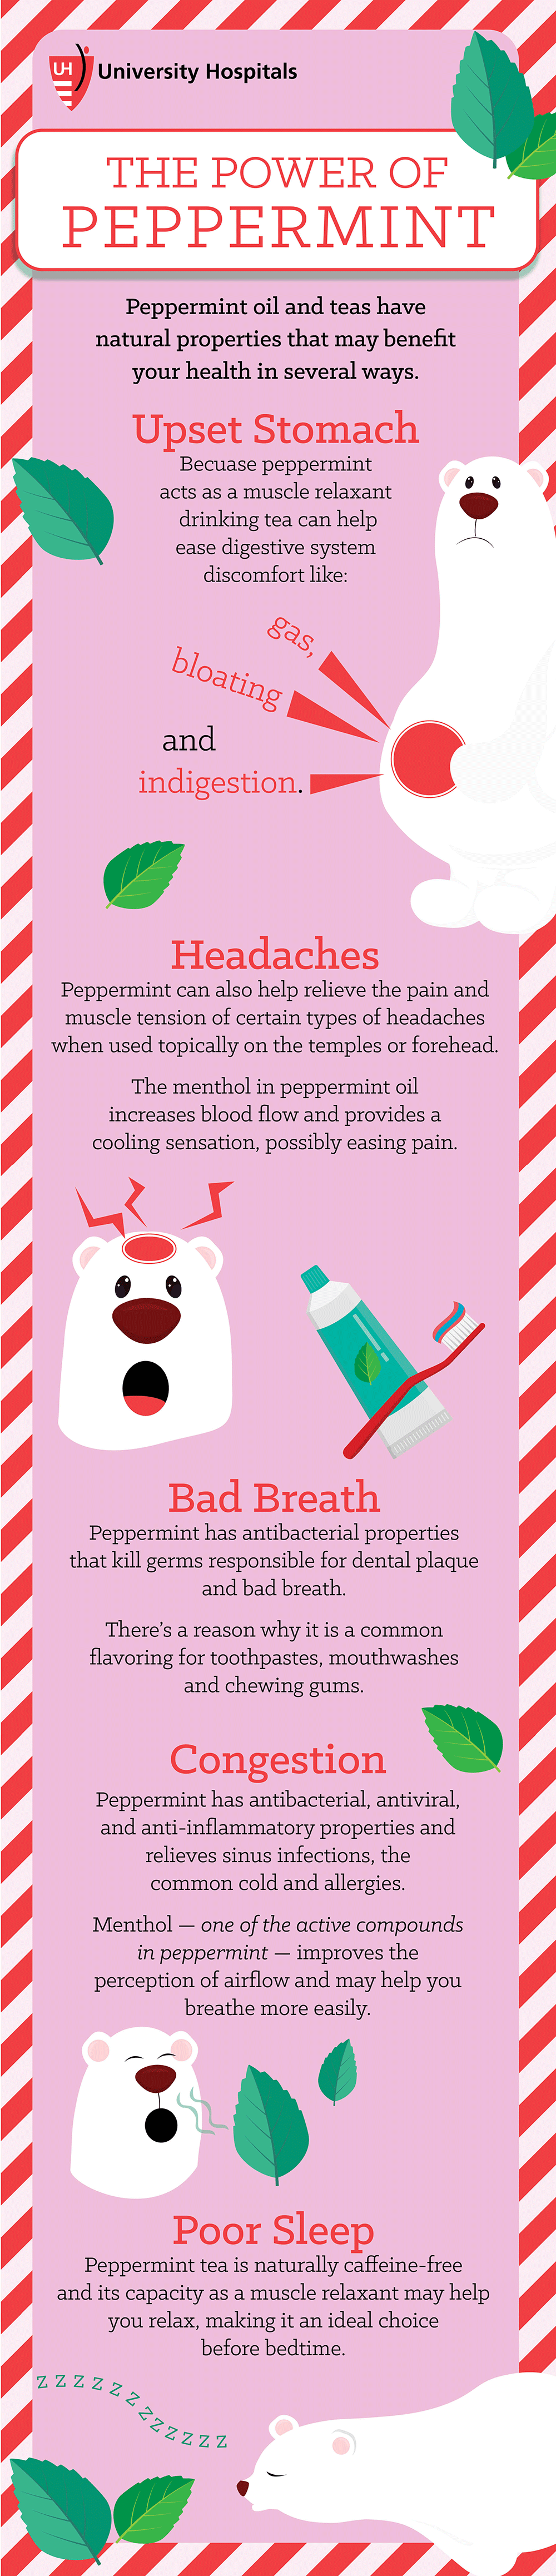 Infographic: The Power of Peppermint